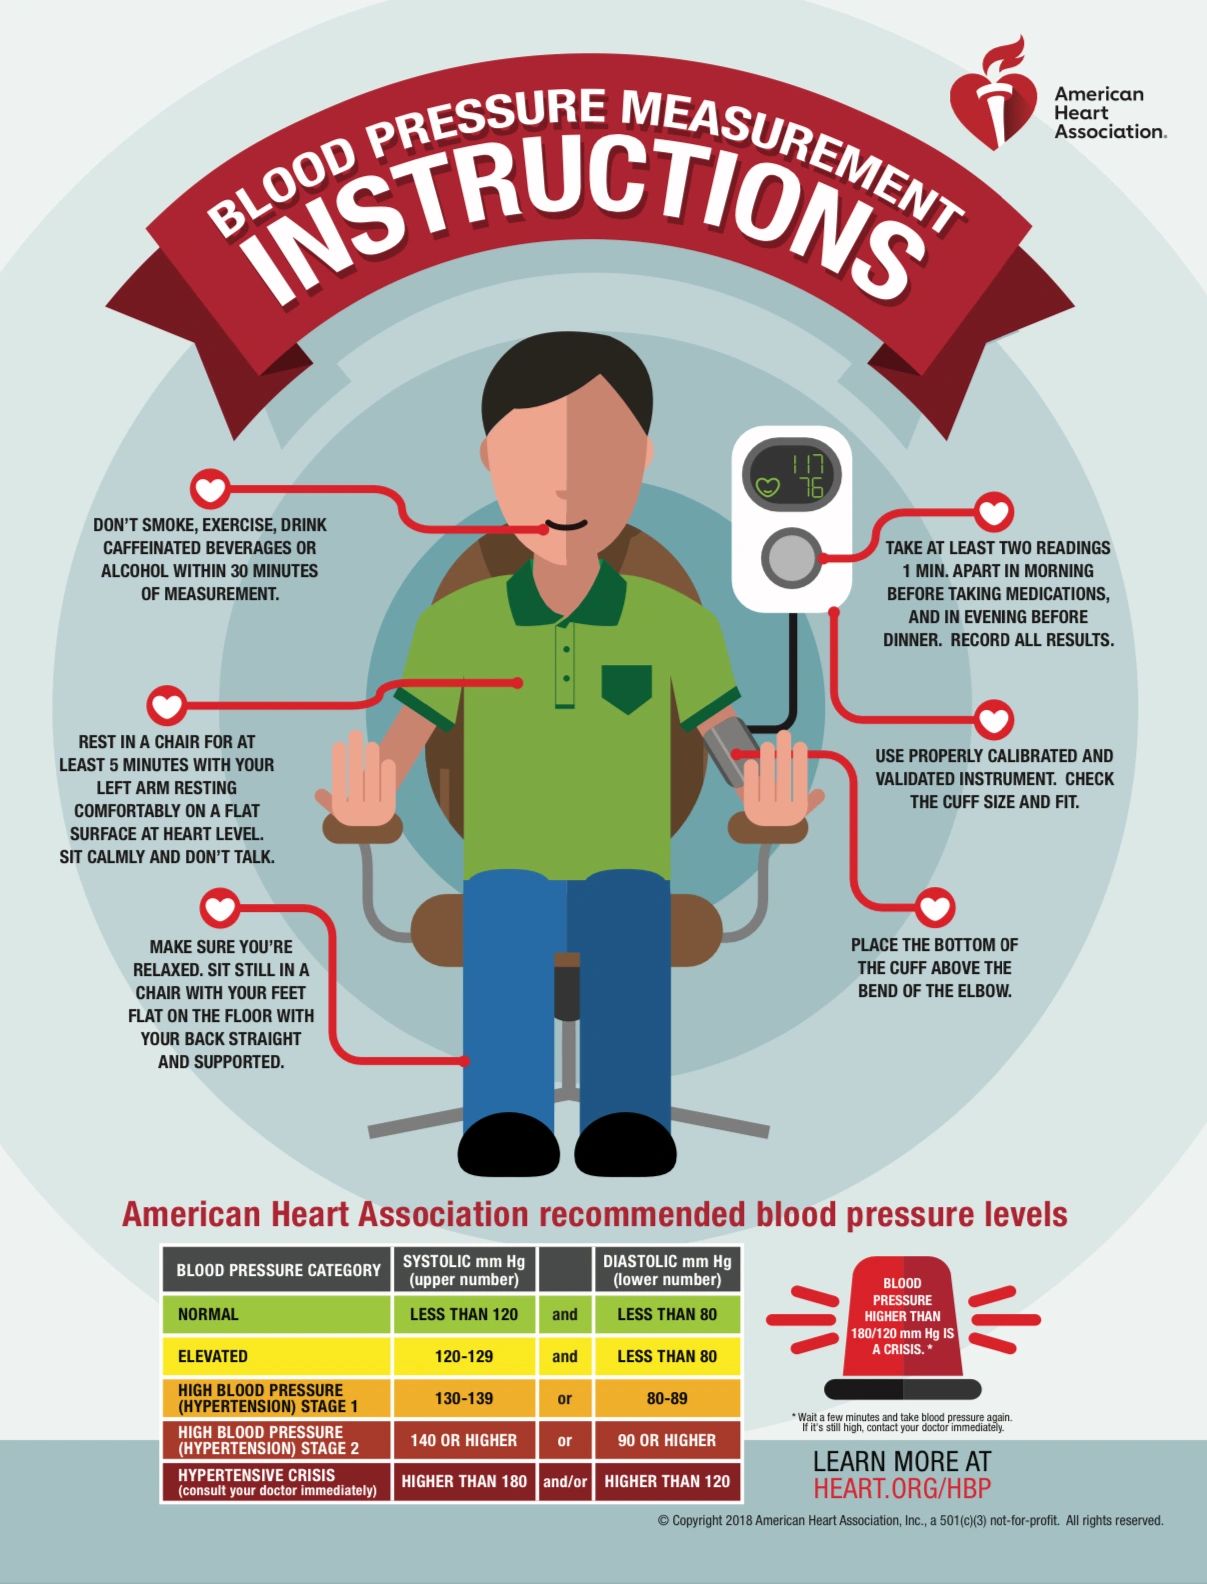 How to Measure Your Blood Pressure at Home